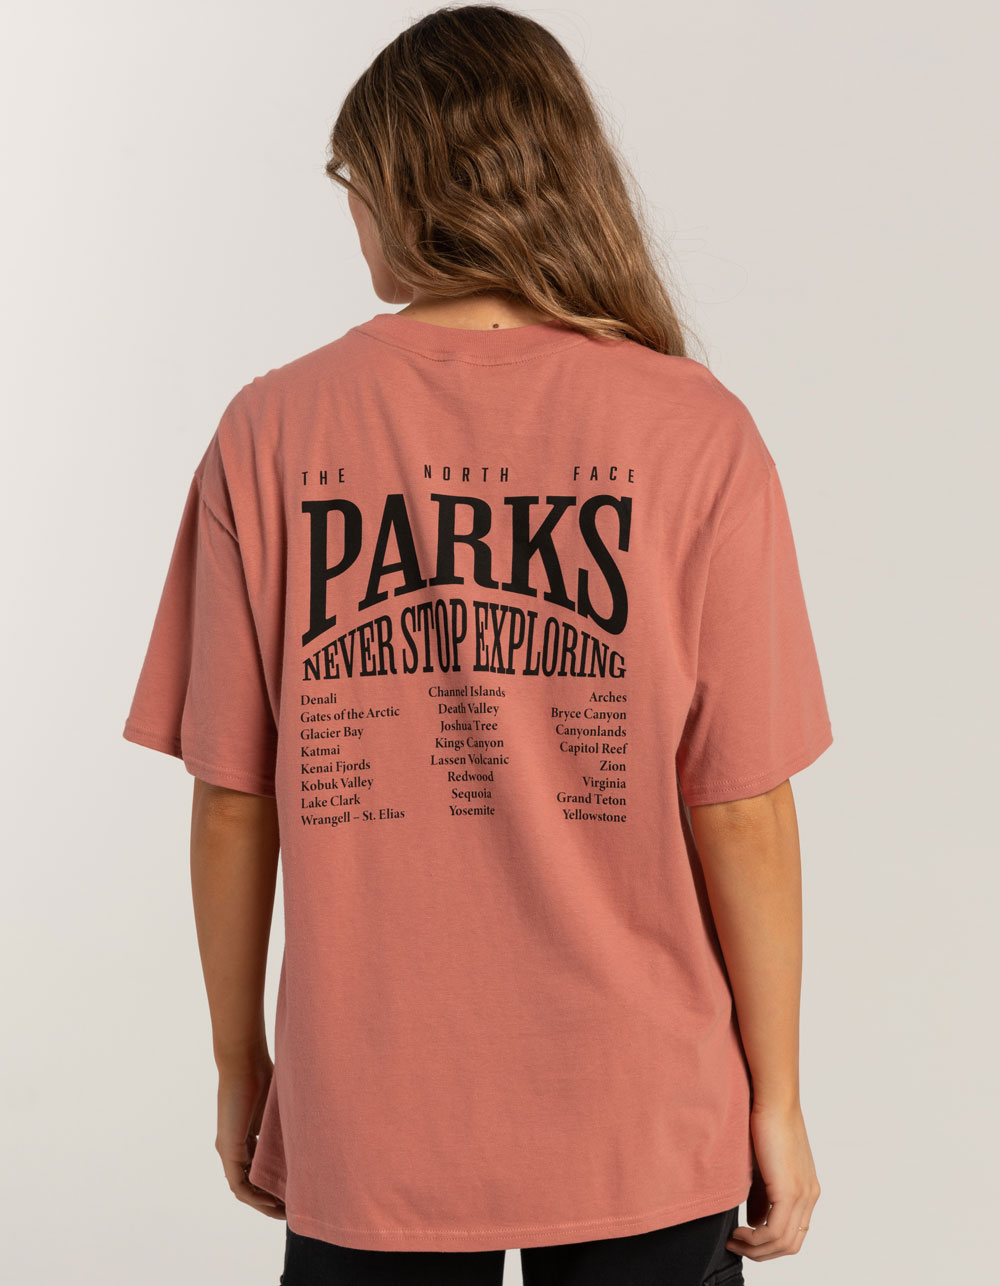 THE NORTH FACE Graphics Womens Oversized Tee